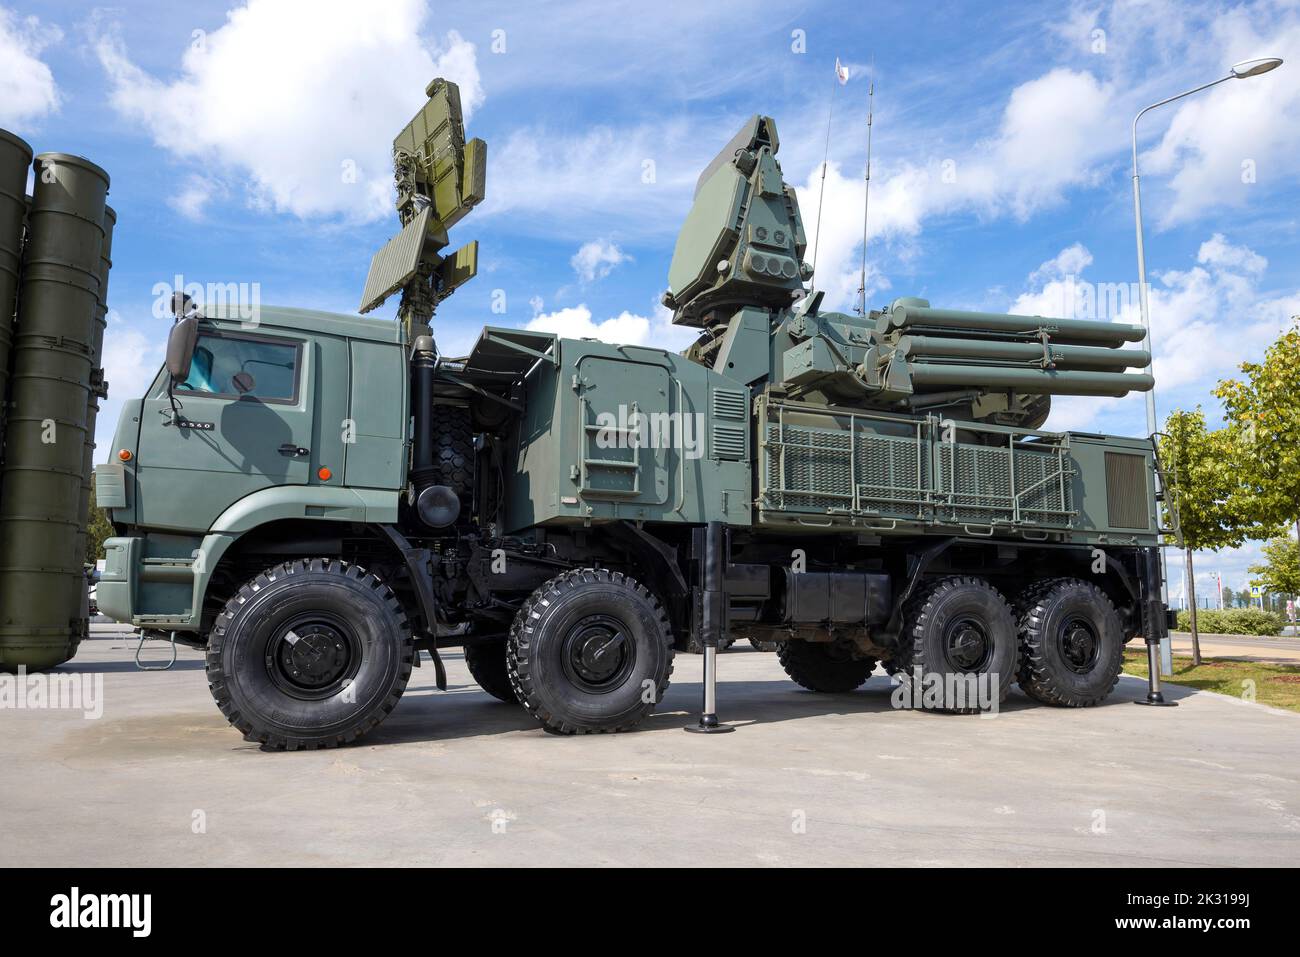 MOSCOW REGION, RUSSIA - AUGUST 25, 2020: Russian self-propelled anti-aircraft missile and gun complex 'Pantsir-S' based on the Kamaz-6560 vehicle at t Stock Photo